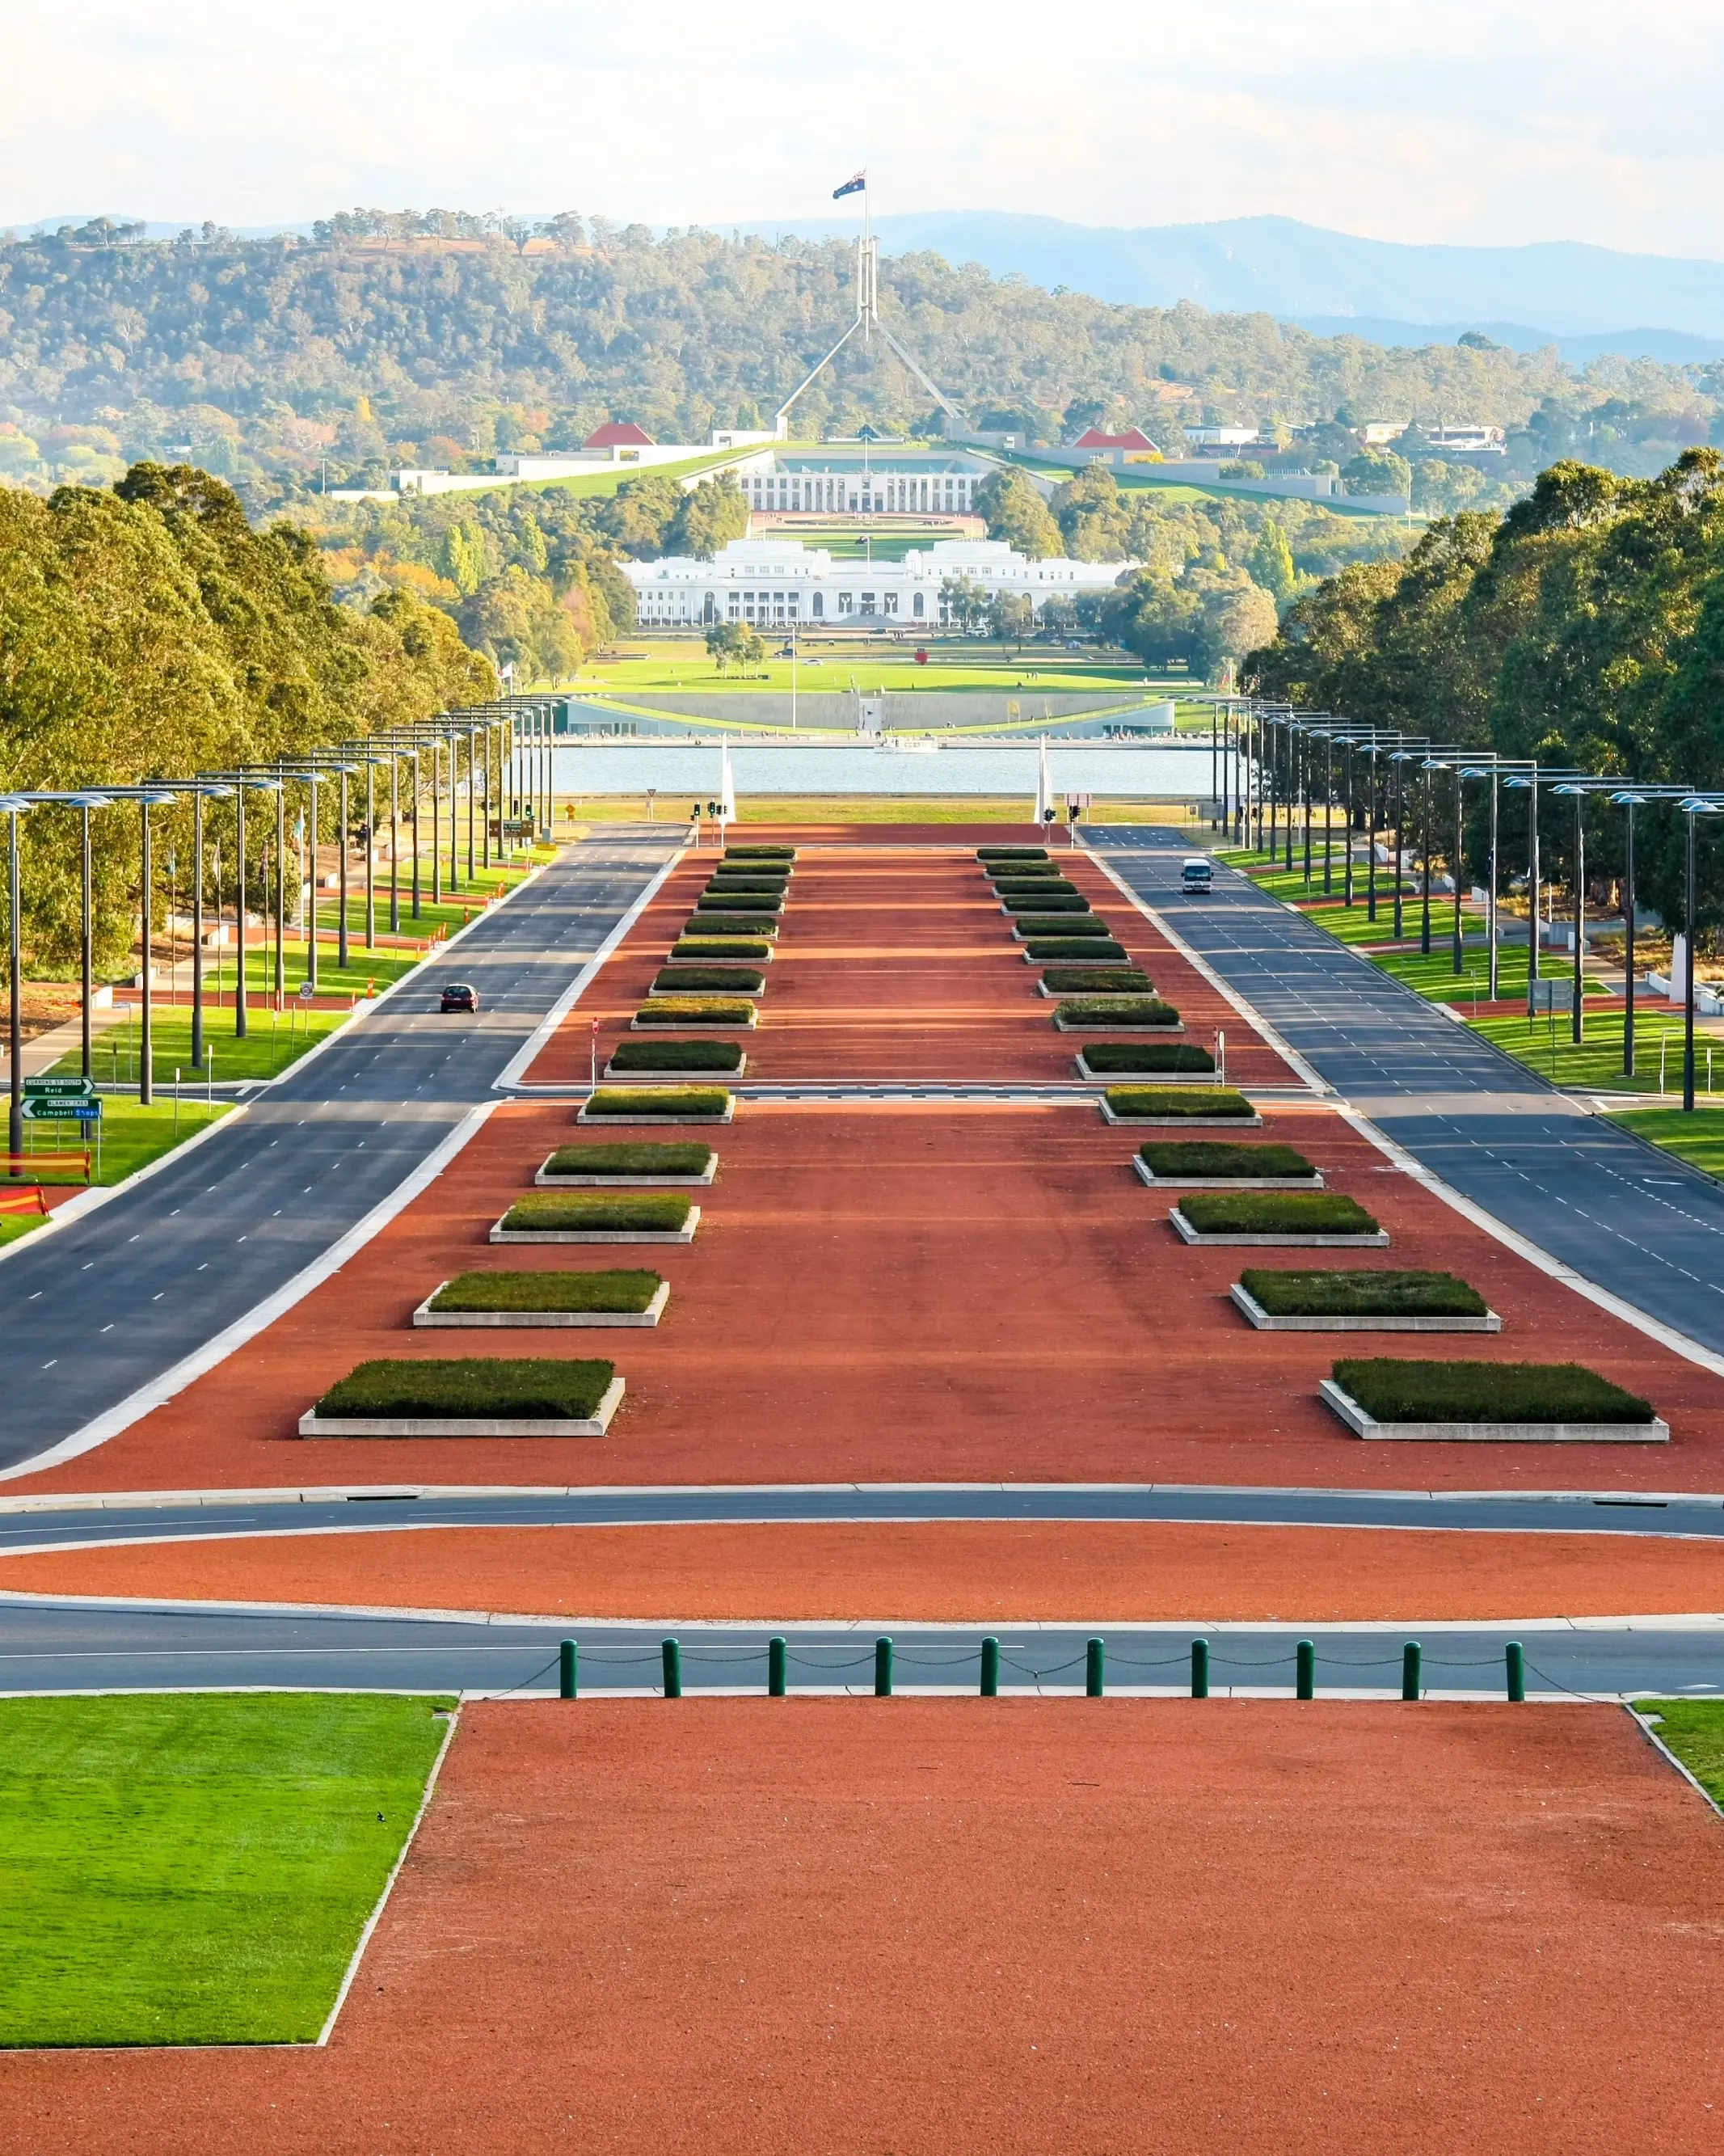 Wide-angle view of Parliament House with bushland in background on a sunny day, Canberra. Image credit: stock.adobe.com